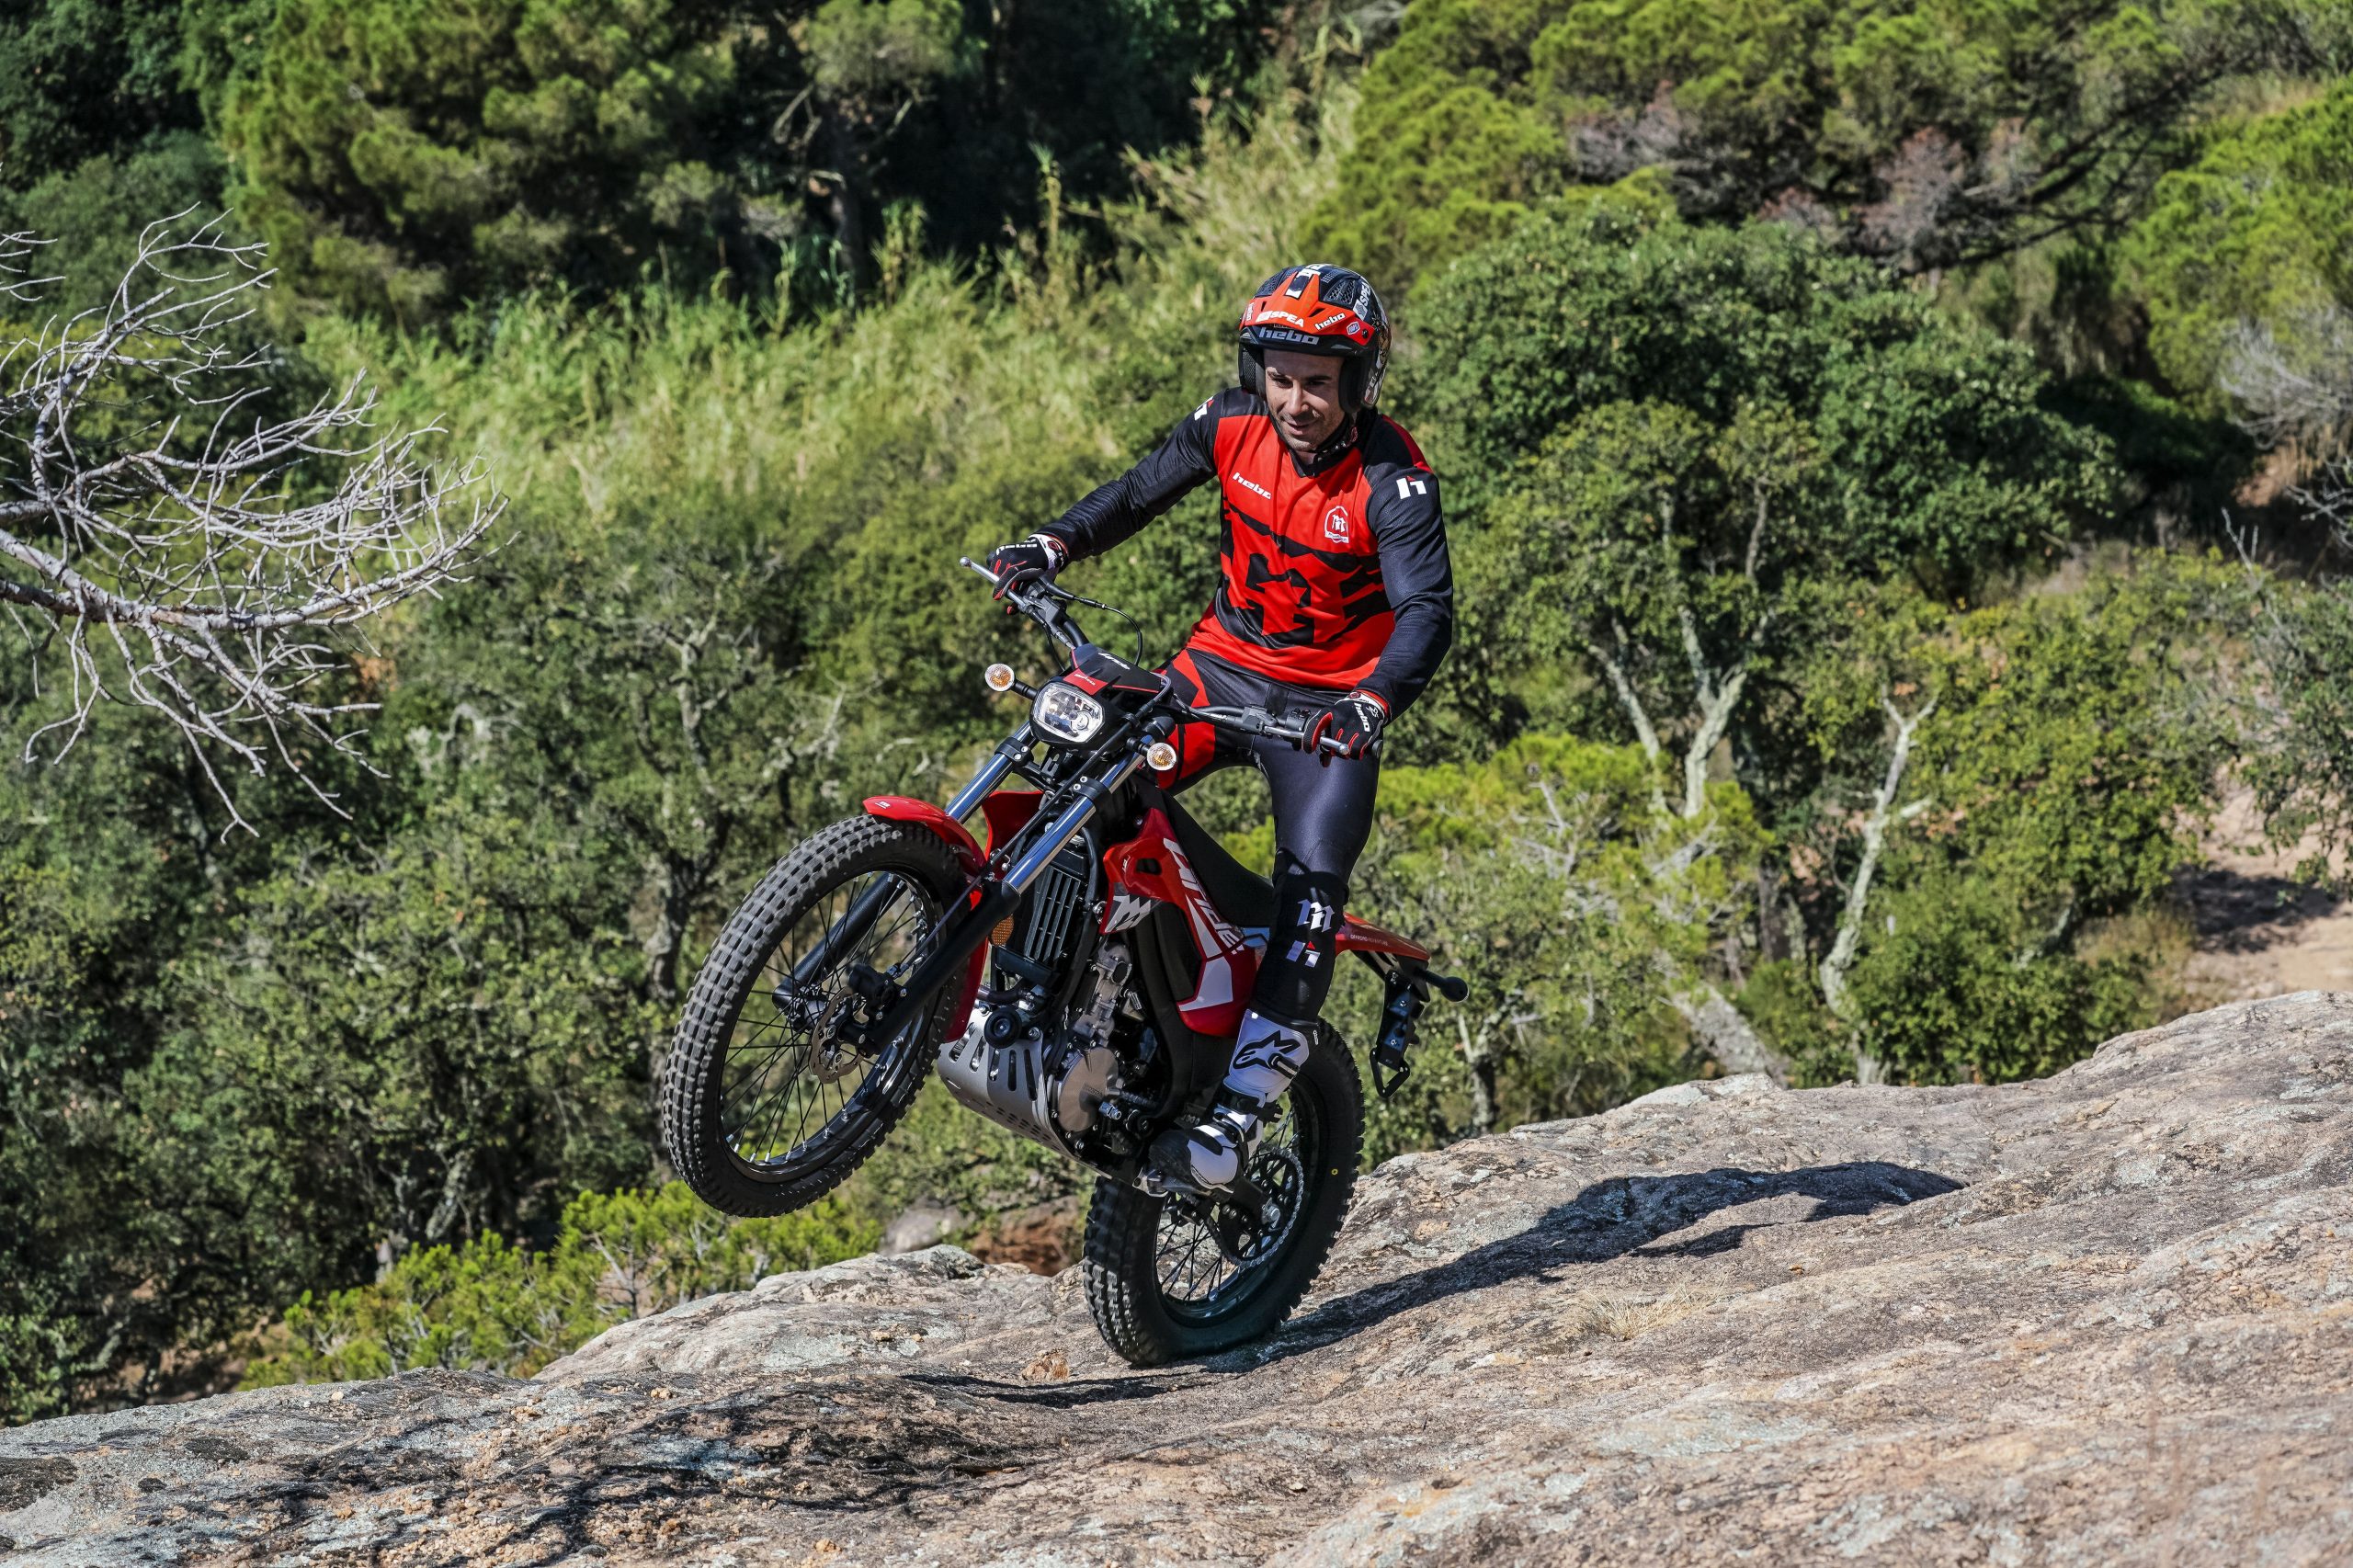 Montesa22_MY23_4Ride_action_5856_ps-scaled.jpg